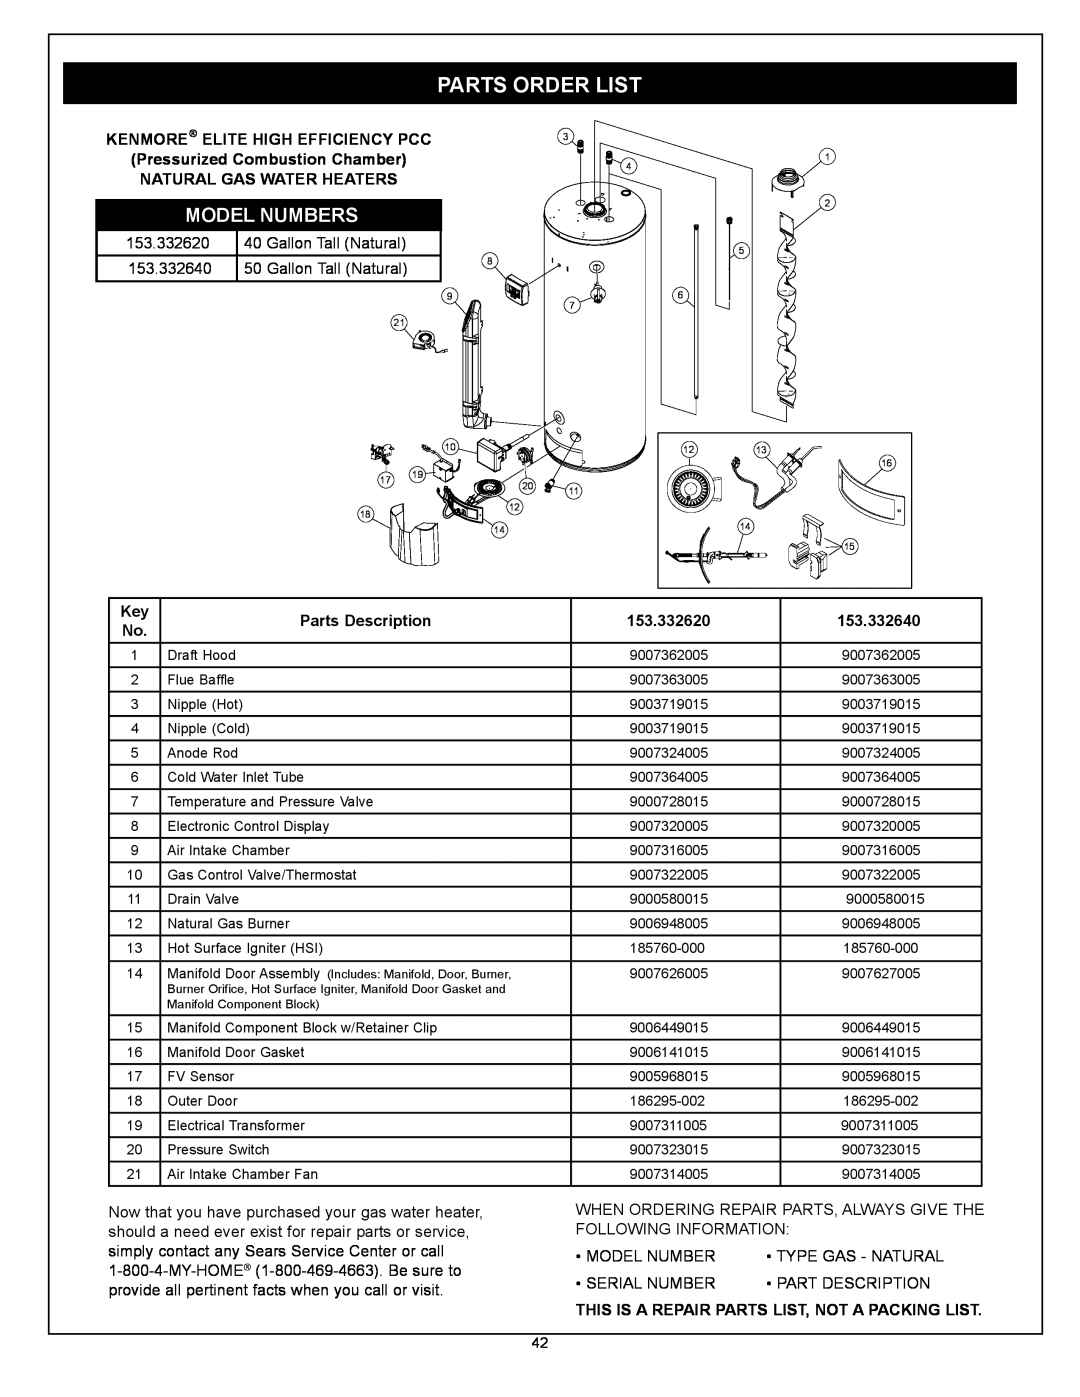 Kenmore 153.33264 manual Parts Order List, Model Numbers, Kenmore Elite High Efficiency Pcc, Pressurized Combustion Chamber 